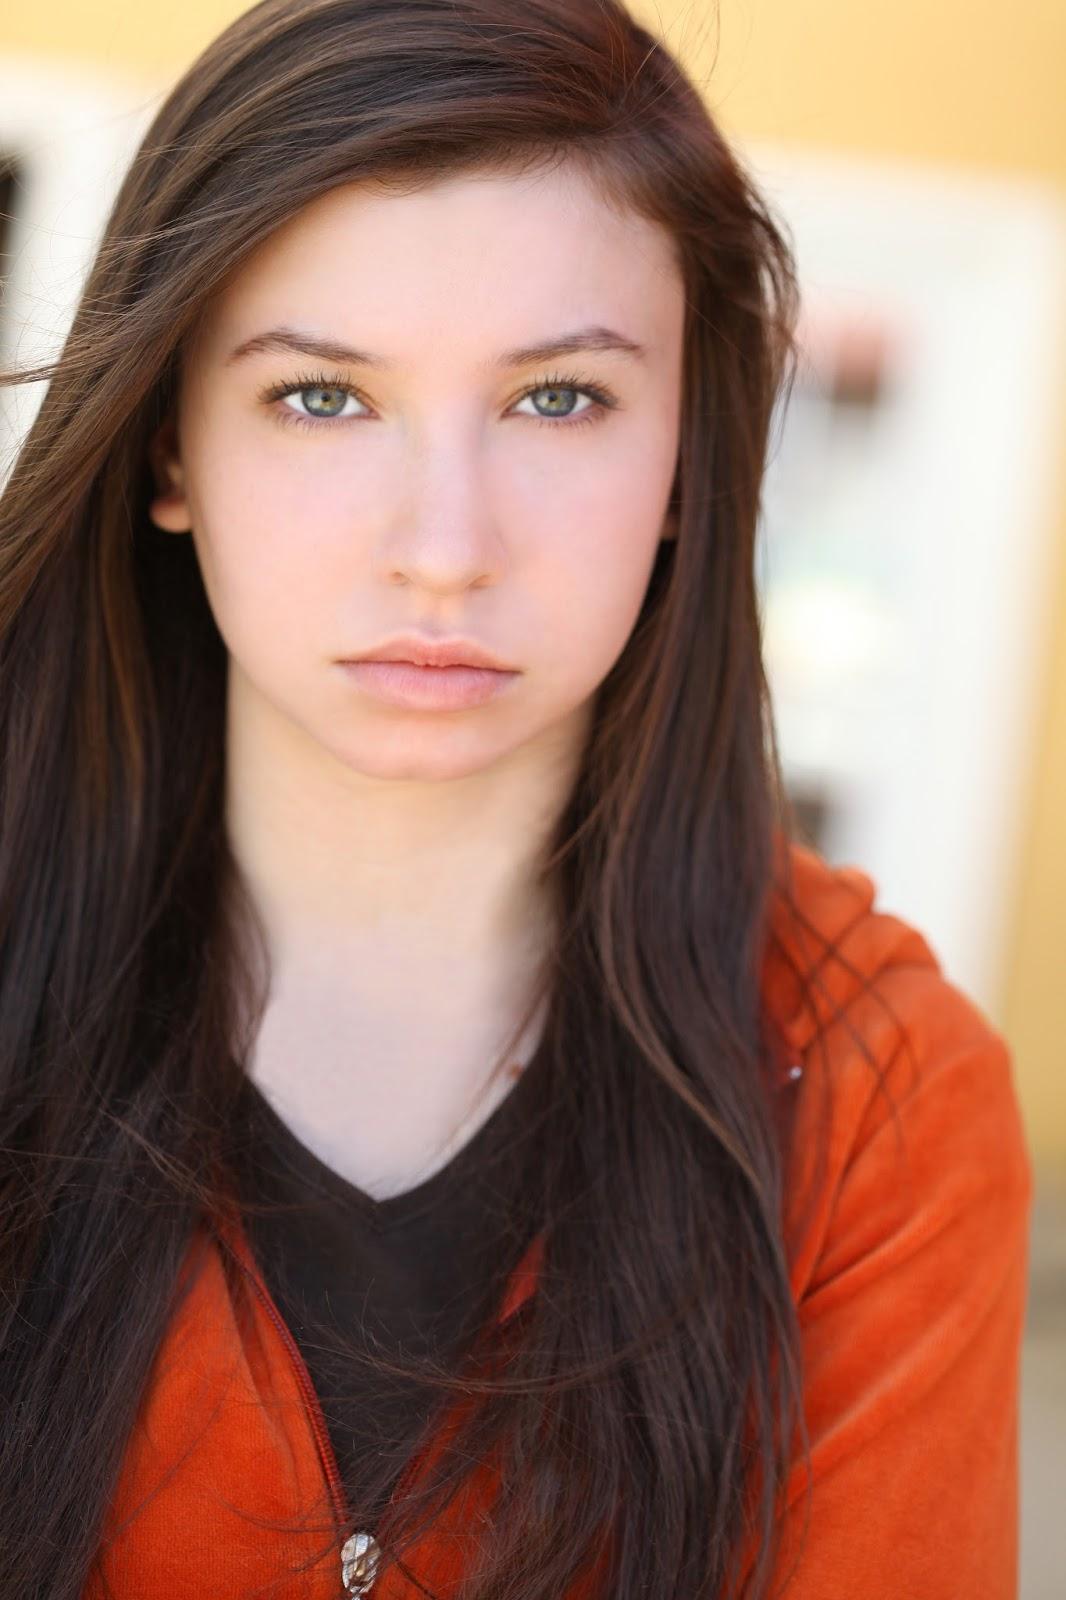 70+ Hot Pictures Of Katelyn Nacon Which Are Sure to Catch Your Attention 164